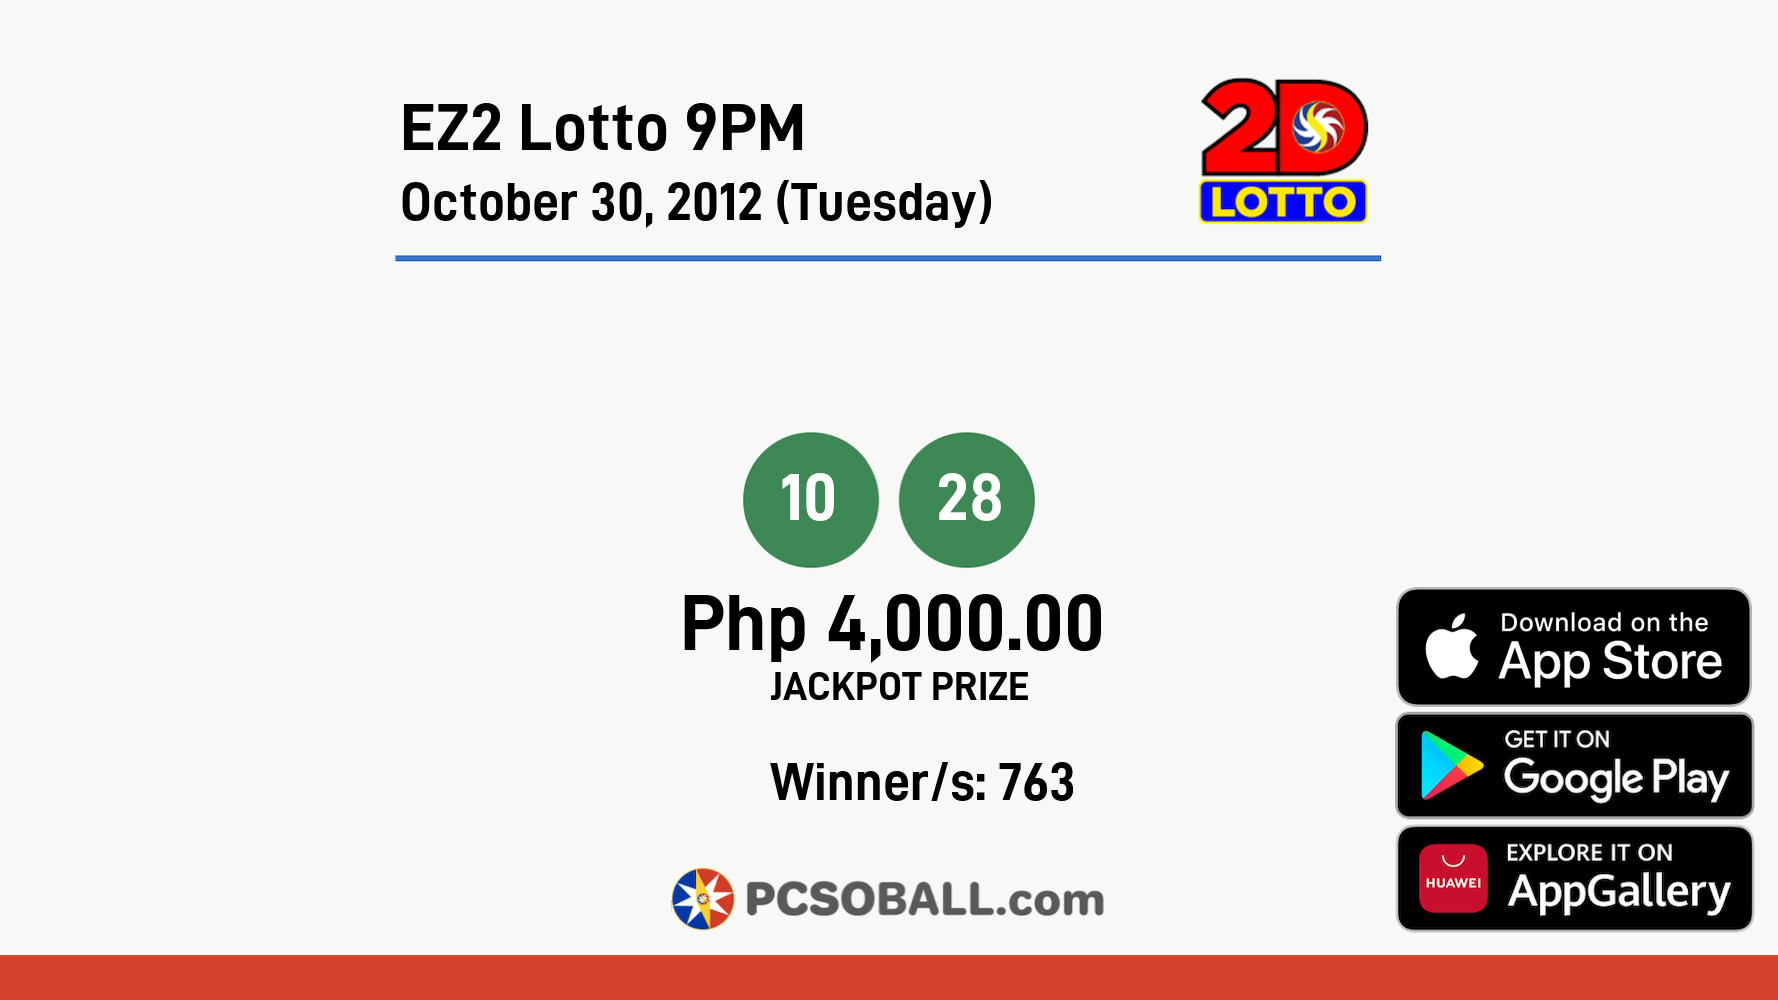 EZ2 Lotto 9PM October 30, 2012 (Tuesday) Result